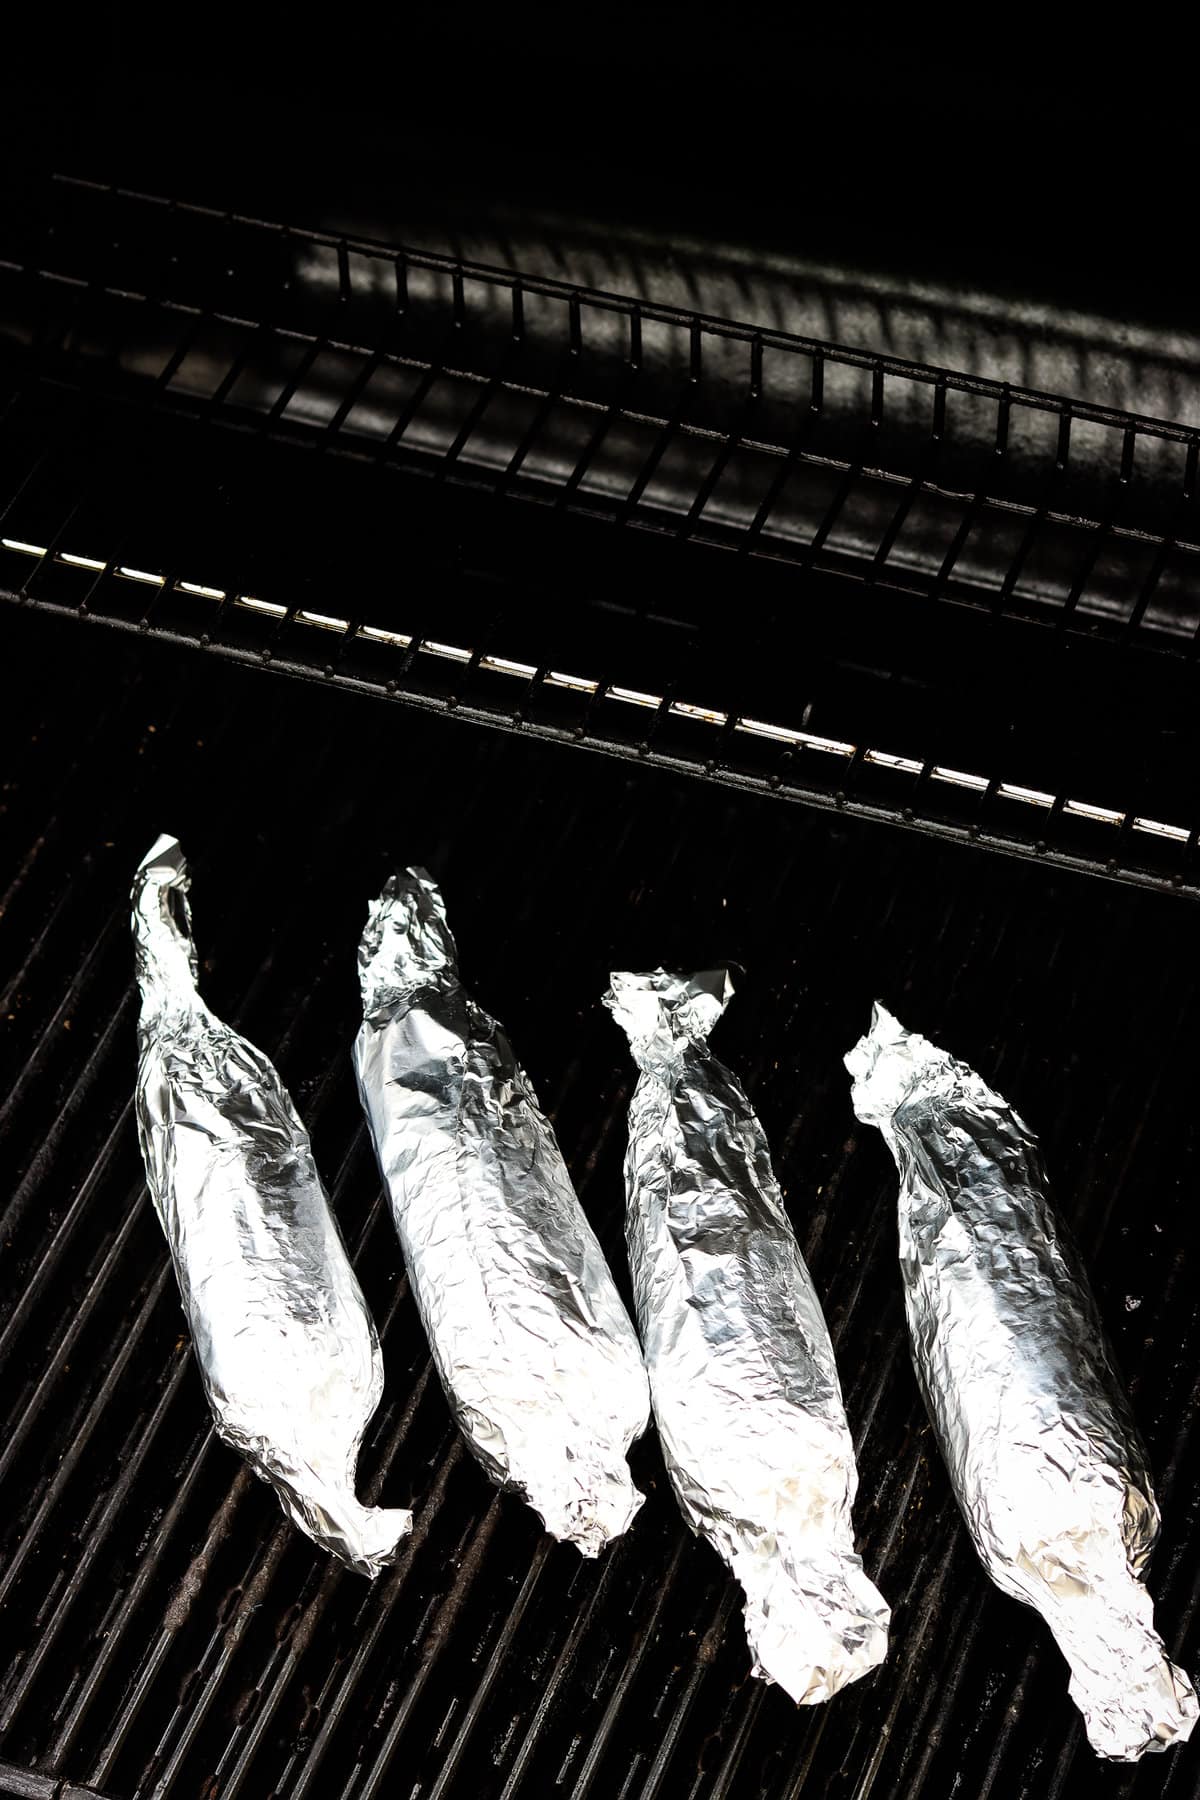 Corn on the cob pieces wrapped in foil on grill grates